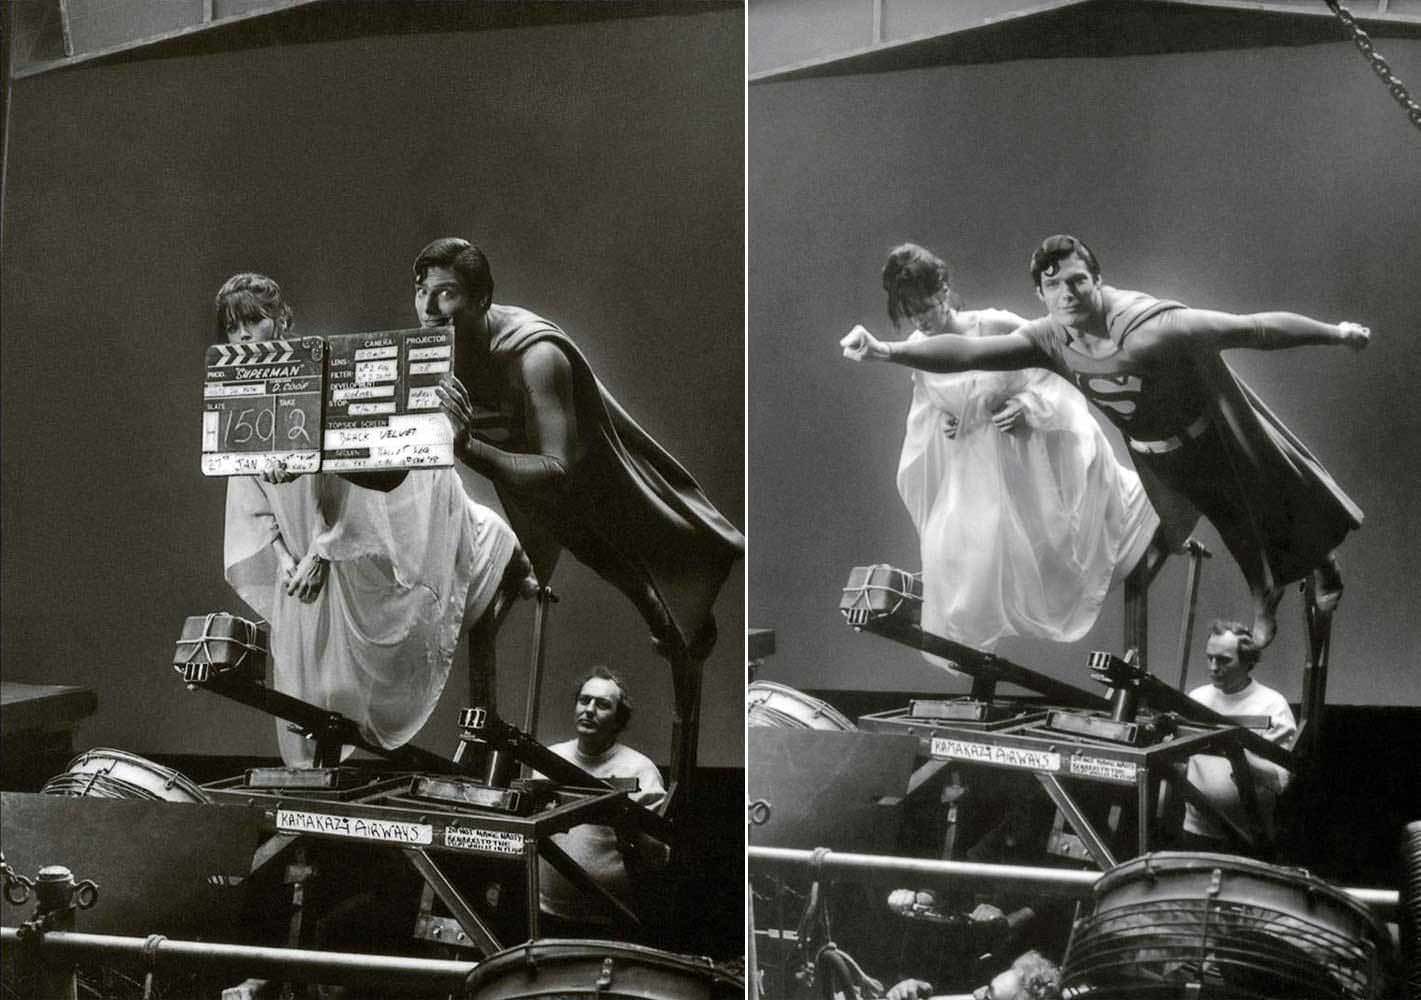 Christopher Reeve having some fun prior to a scene with Margo Kidder in Superman (1978).